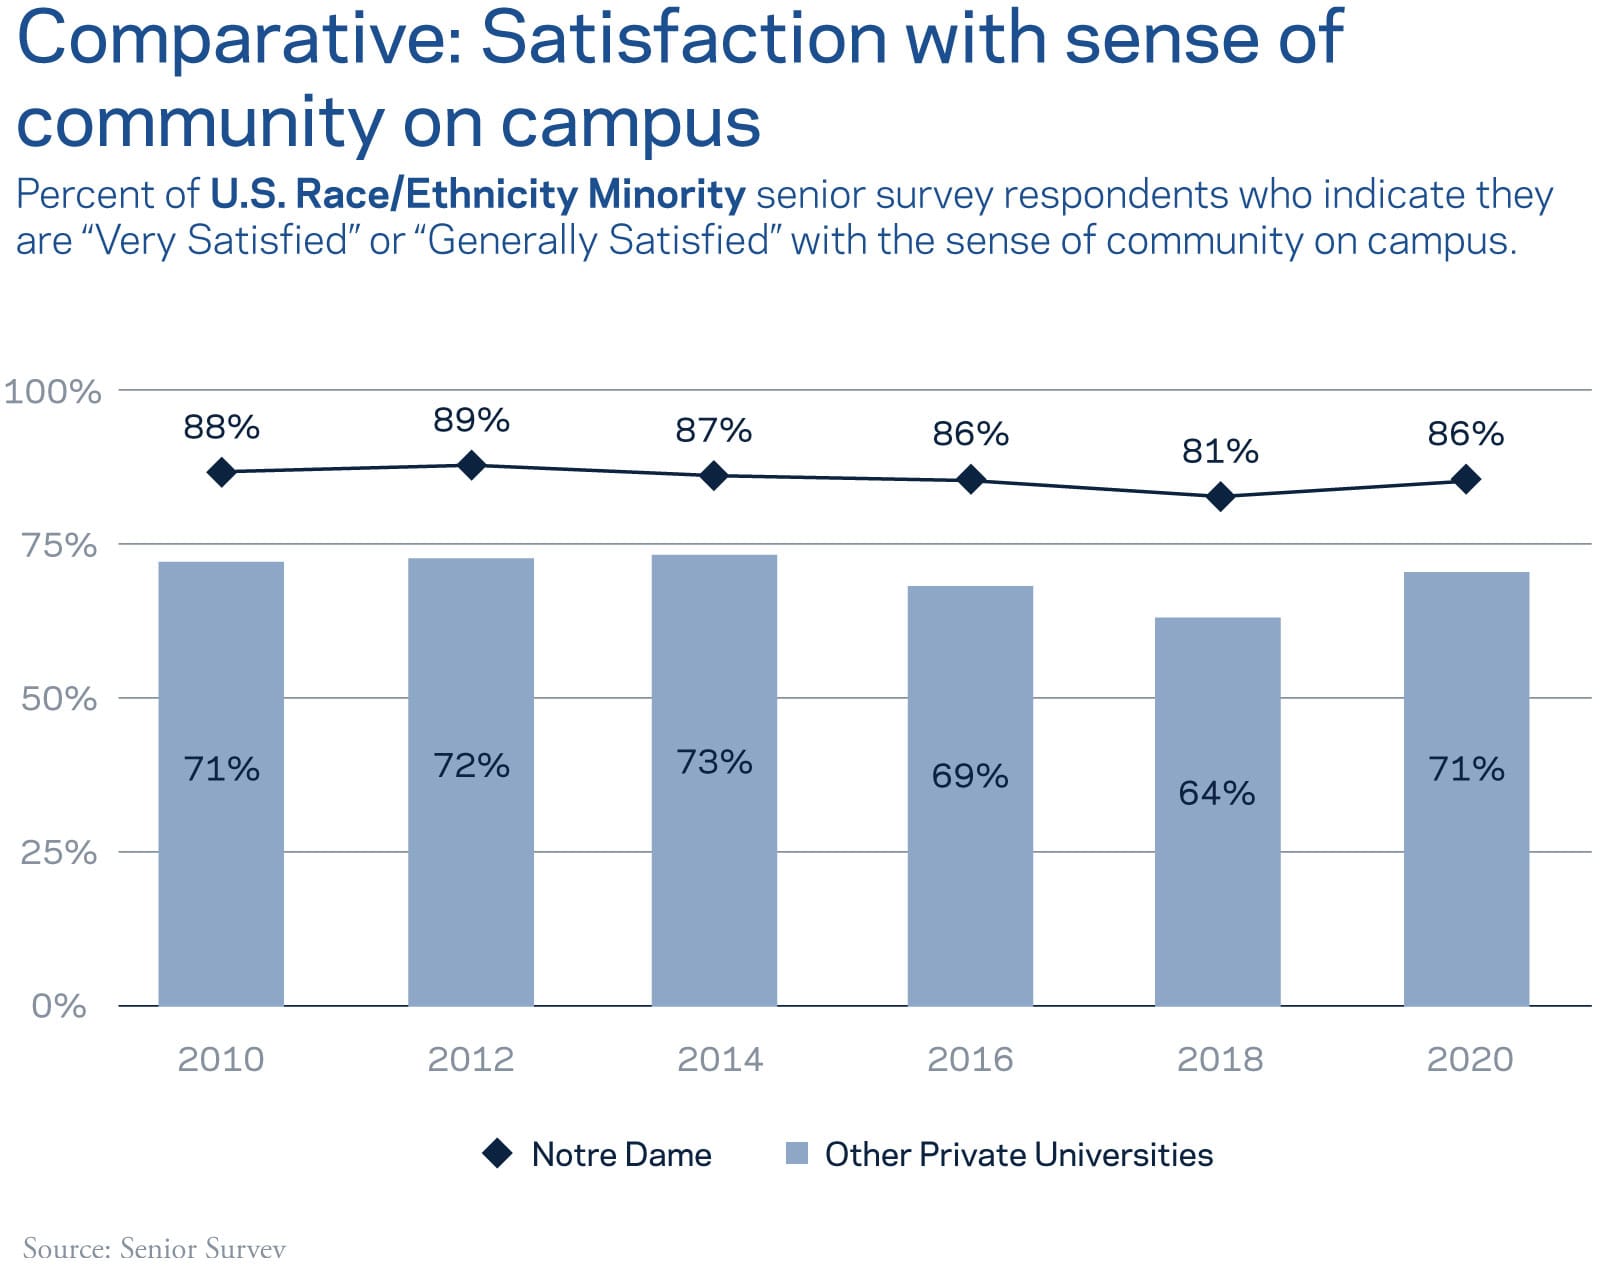 Comparative: Satisfaction with sense of community on campus - Percent of U.S. Race/Ethnicity Minority senior survey respondents who indicate they are Very Satisfied or Generally Satisfied with the sense of community of campus.